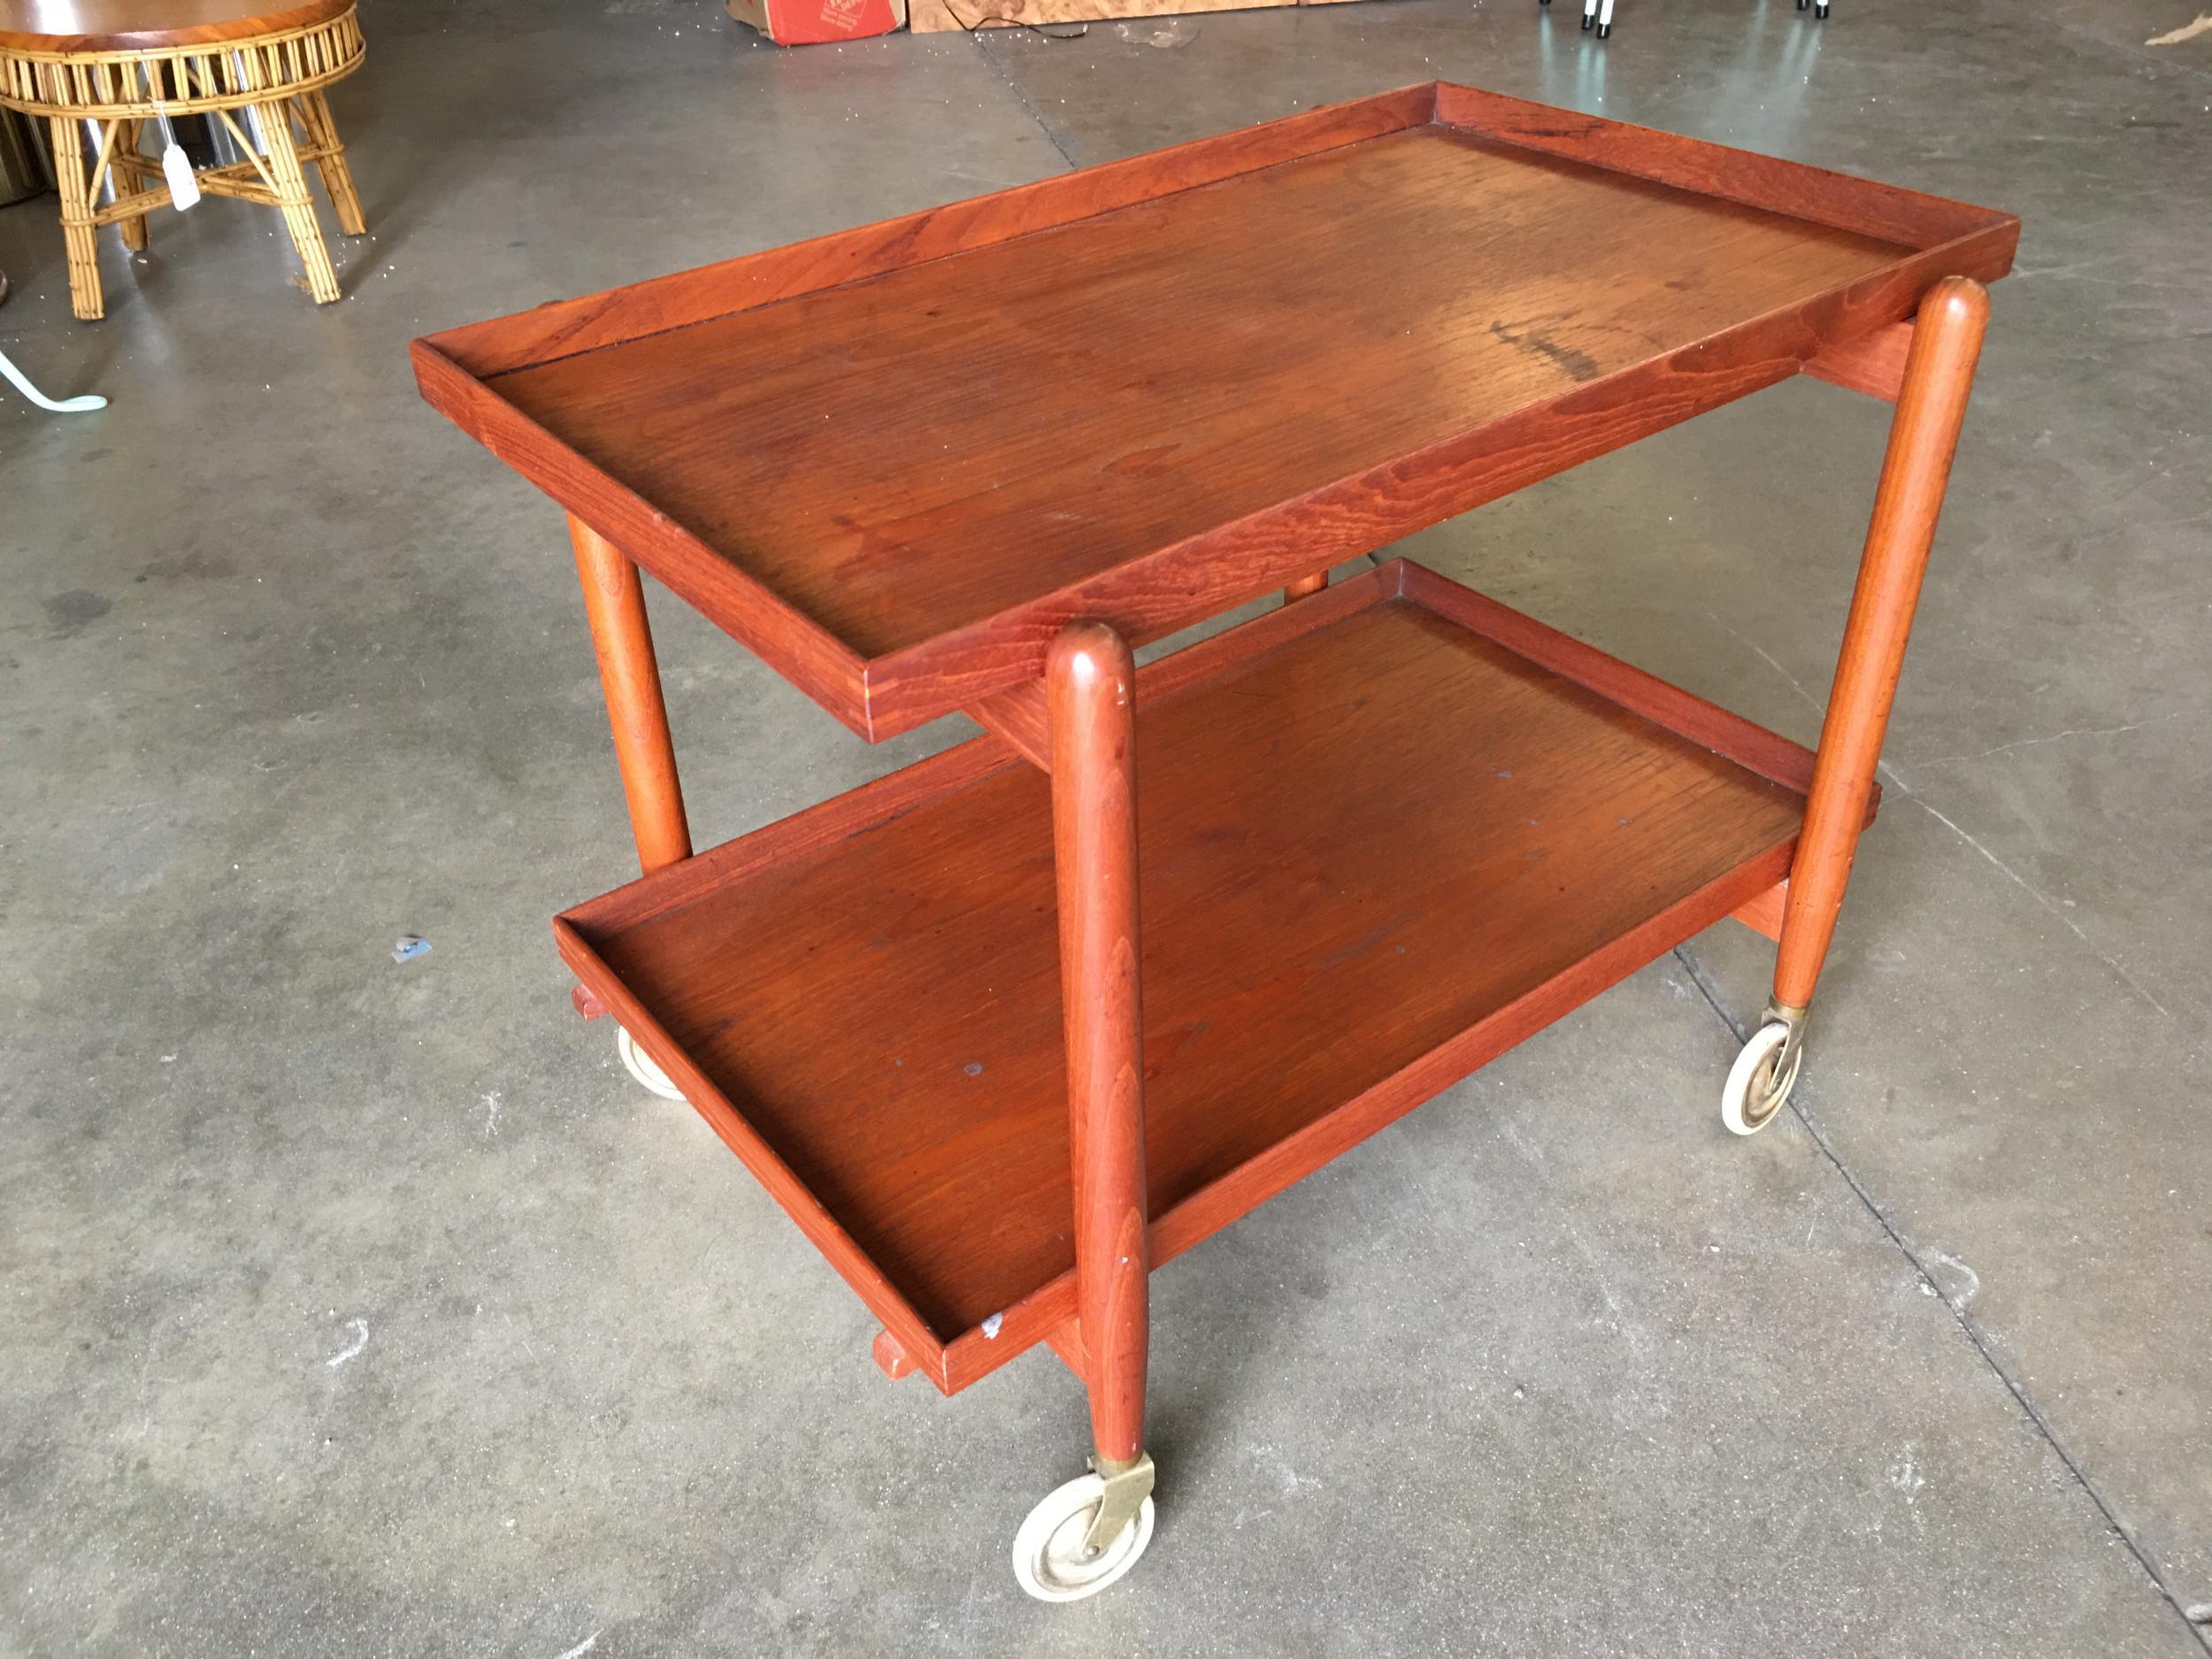 Vintage Poul Hundevad Danish Modern teak rolling bar cart. The ingenious design allows you to slide the top shelf to the left, lift the bottom shelf, and add it to the top to create a double-wide serving tabletop surface.

This design is widely